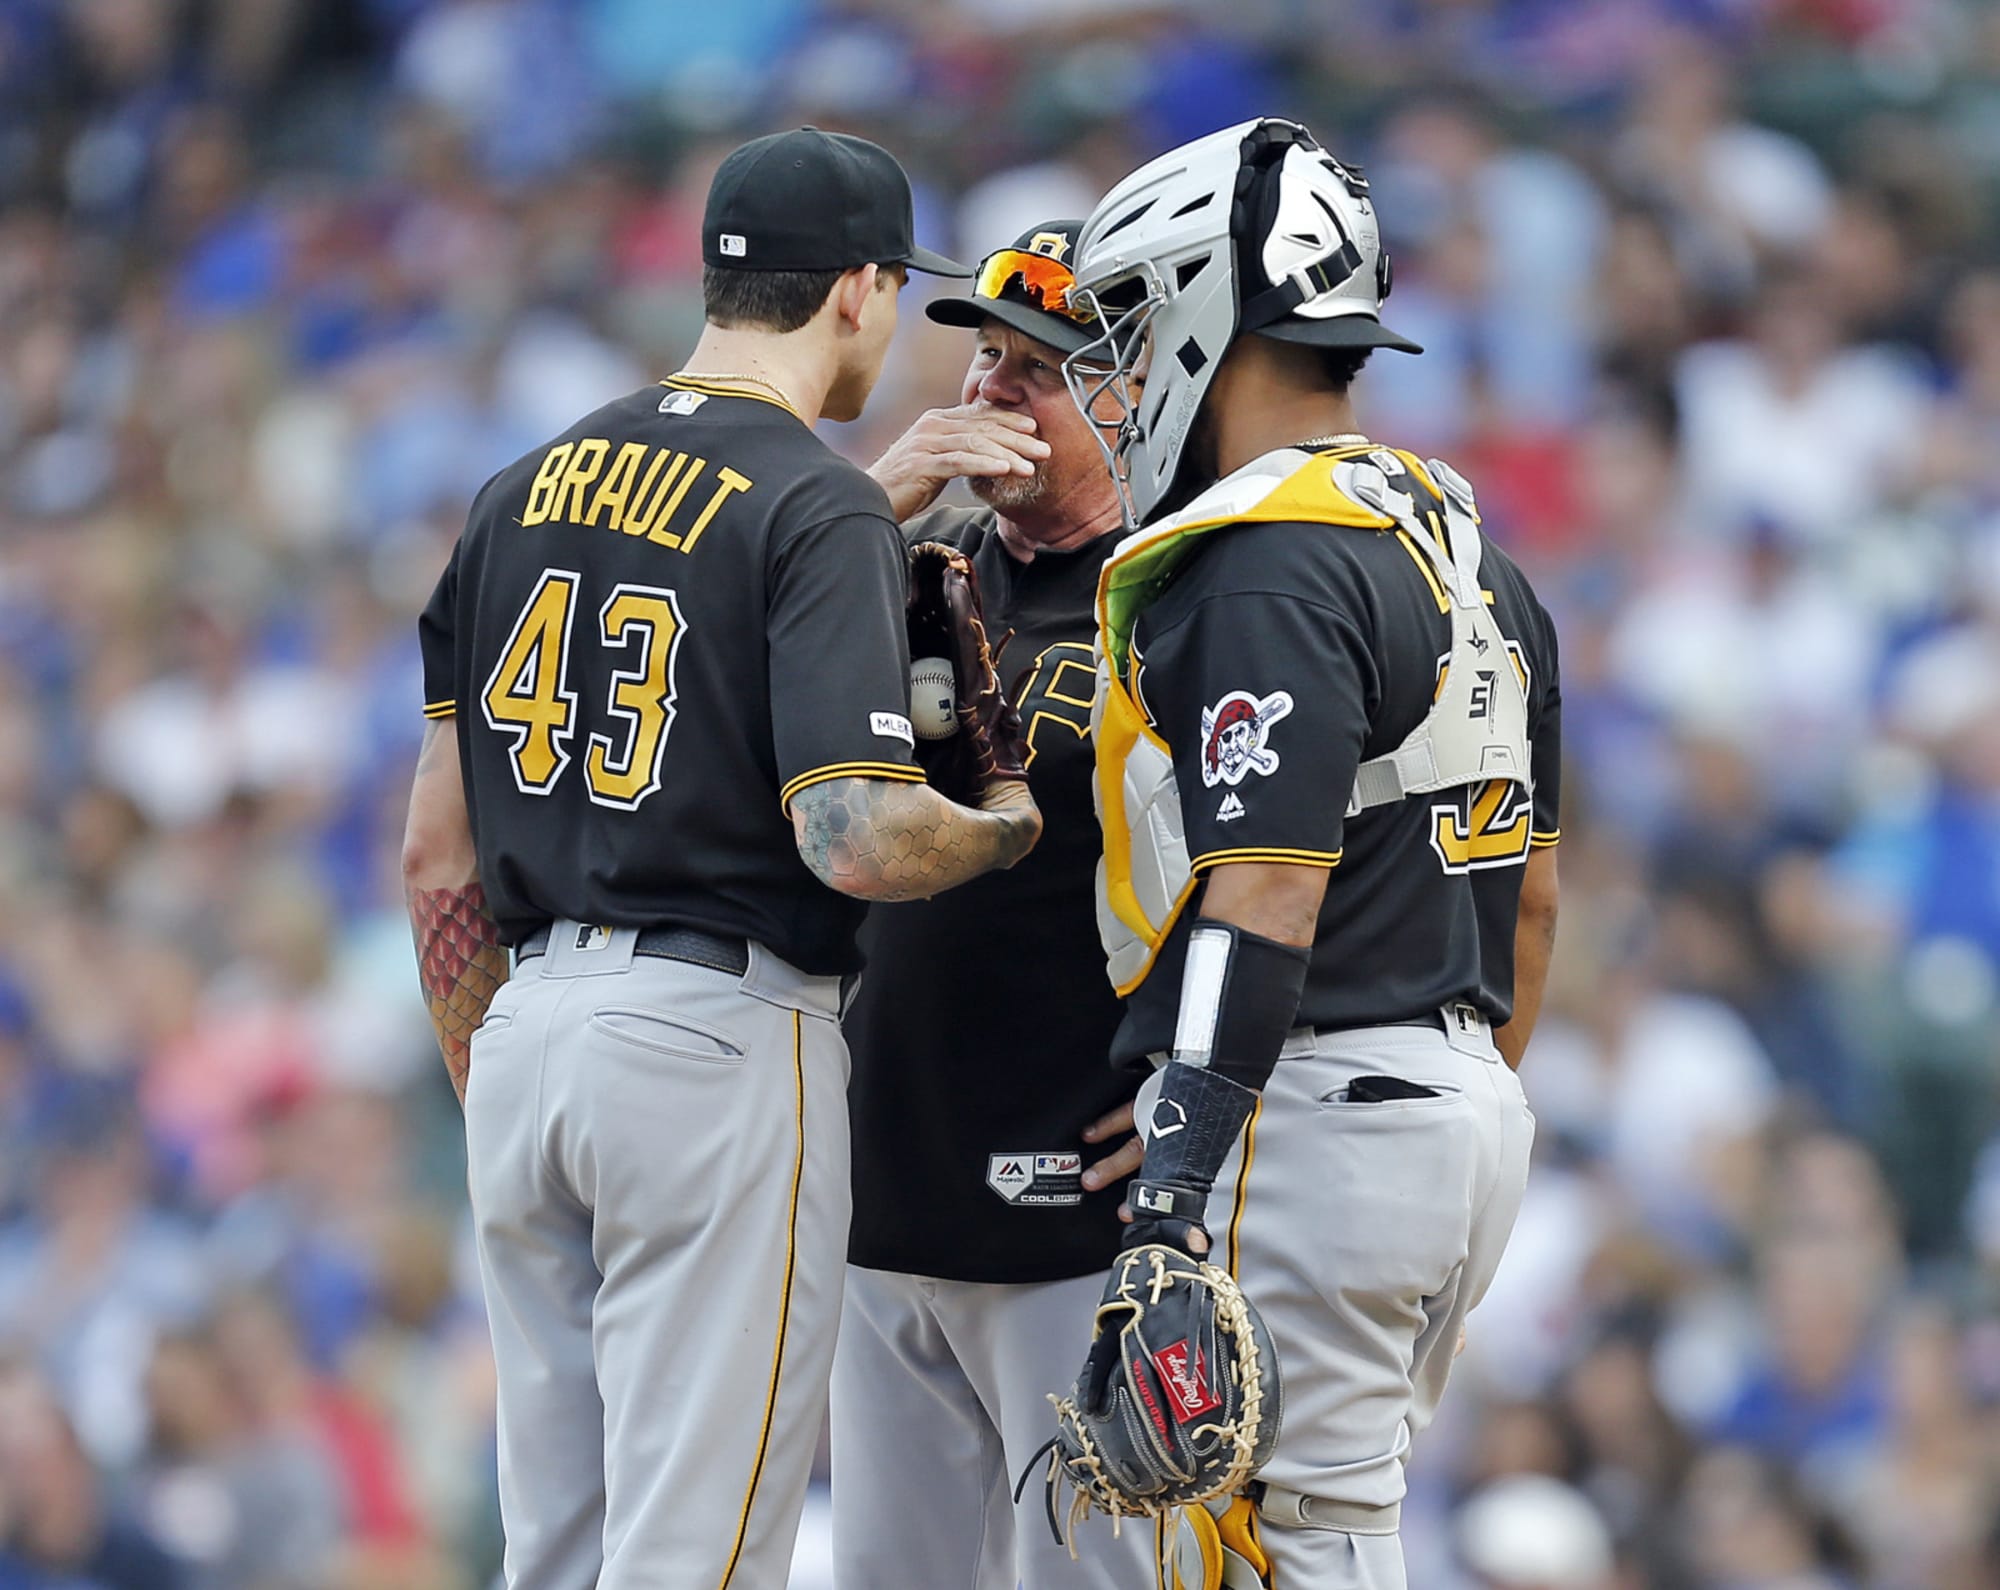 Pittsburgh Pirates: Pitching Is to Blame for Disastrous Season